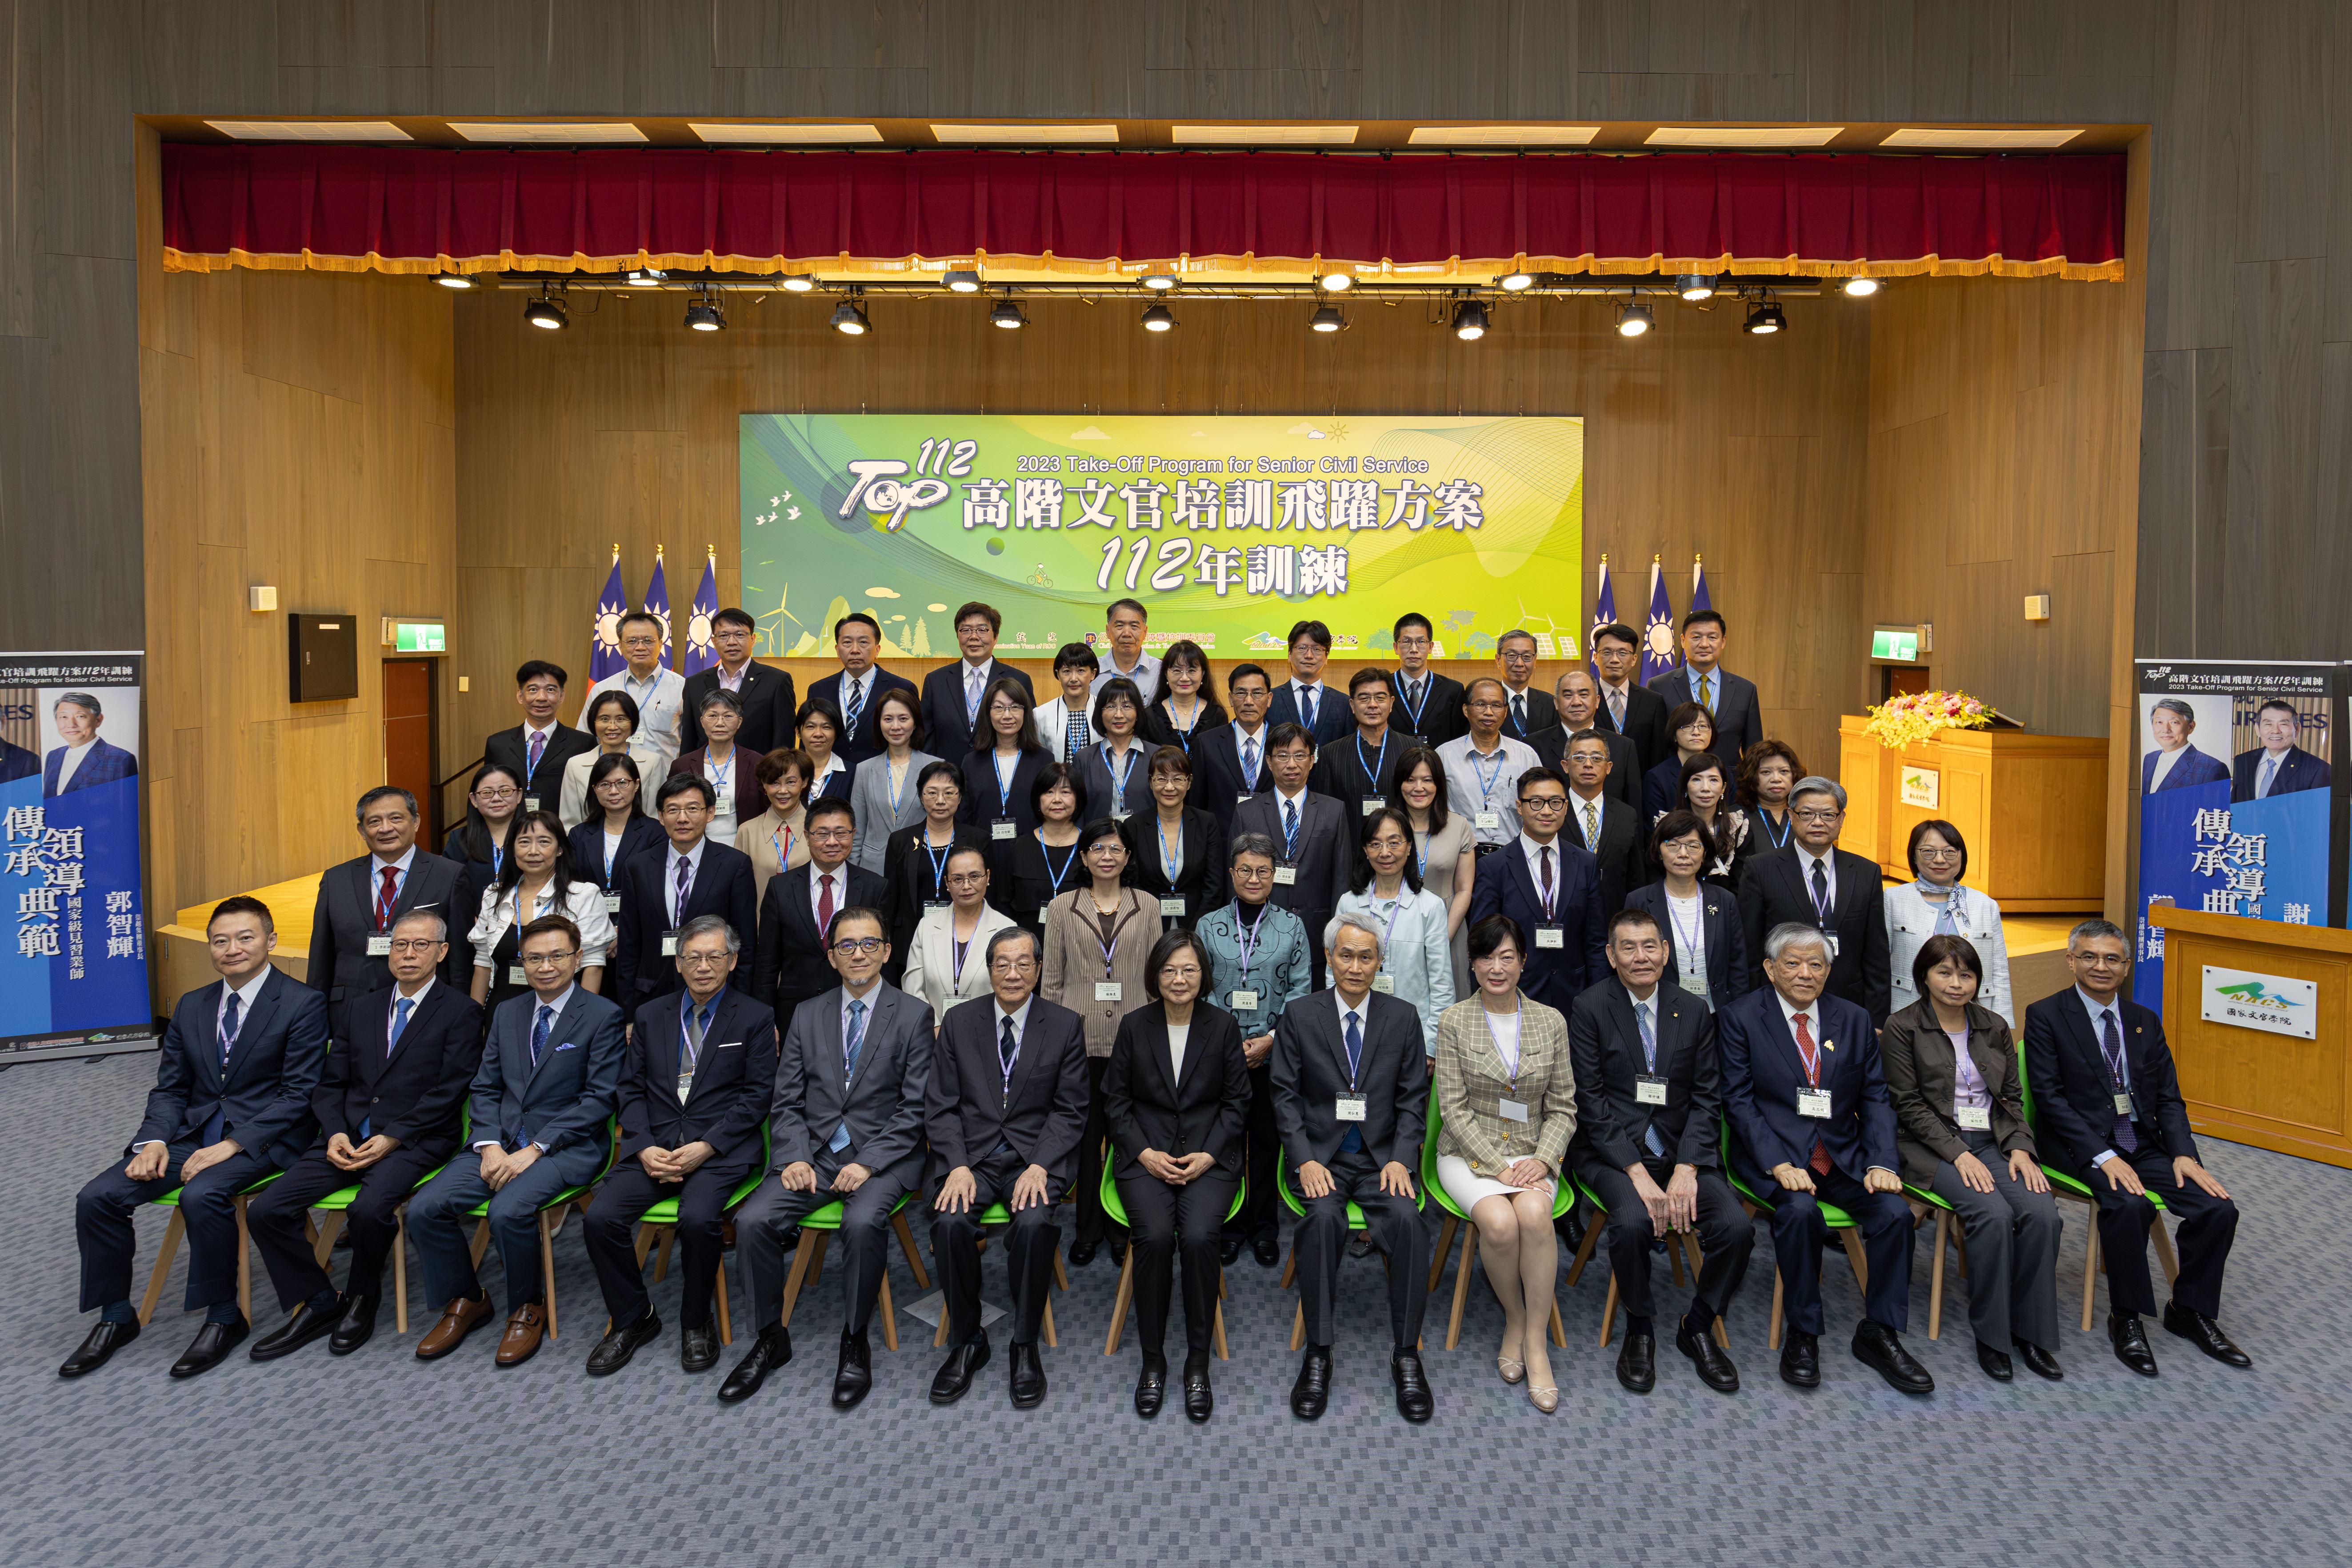 President Tsai joins trainees in a group photo at the opening ceremony of 2019 training program